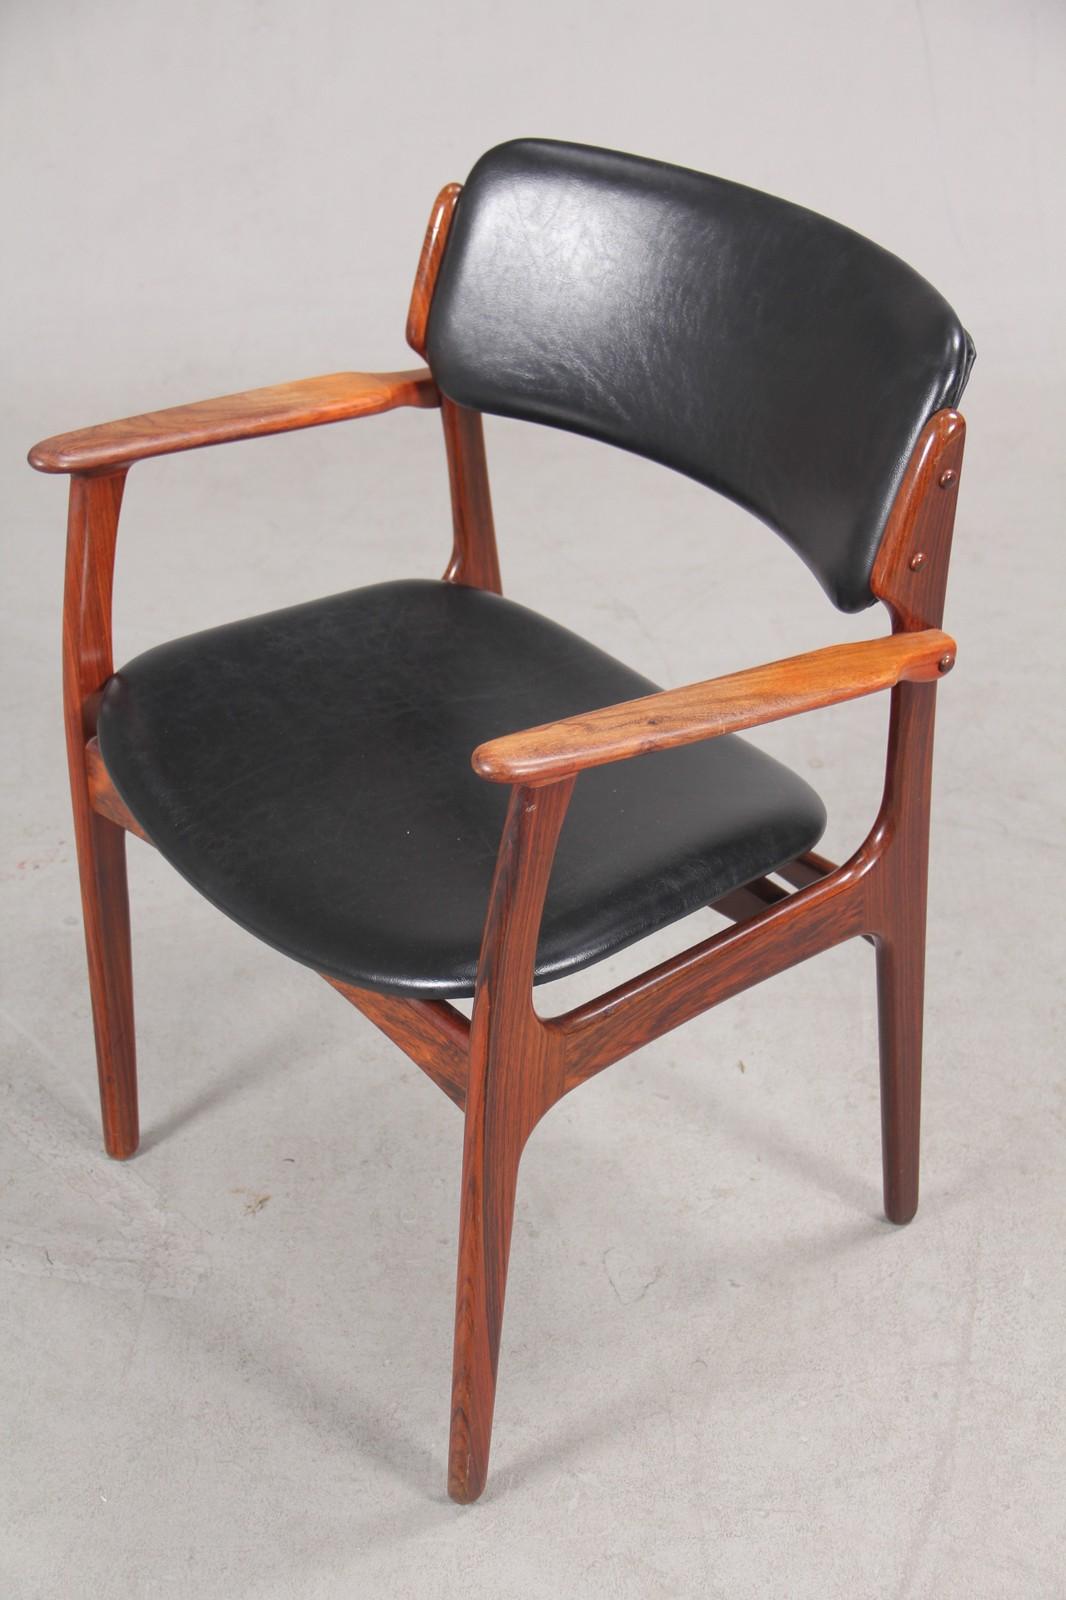 Set of two elegant yet solid Erik Buch armchairs model in rosewood with excellent woodwork that are evidence of good design and craftsmanship.

A solid rosewood construction with Erik Buch's characteristic floating seat and backrest that ensures a